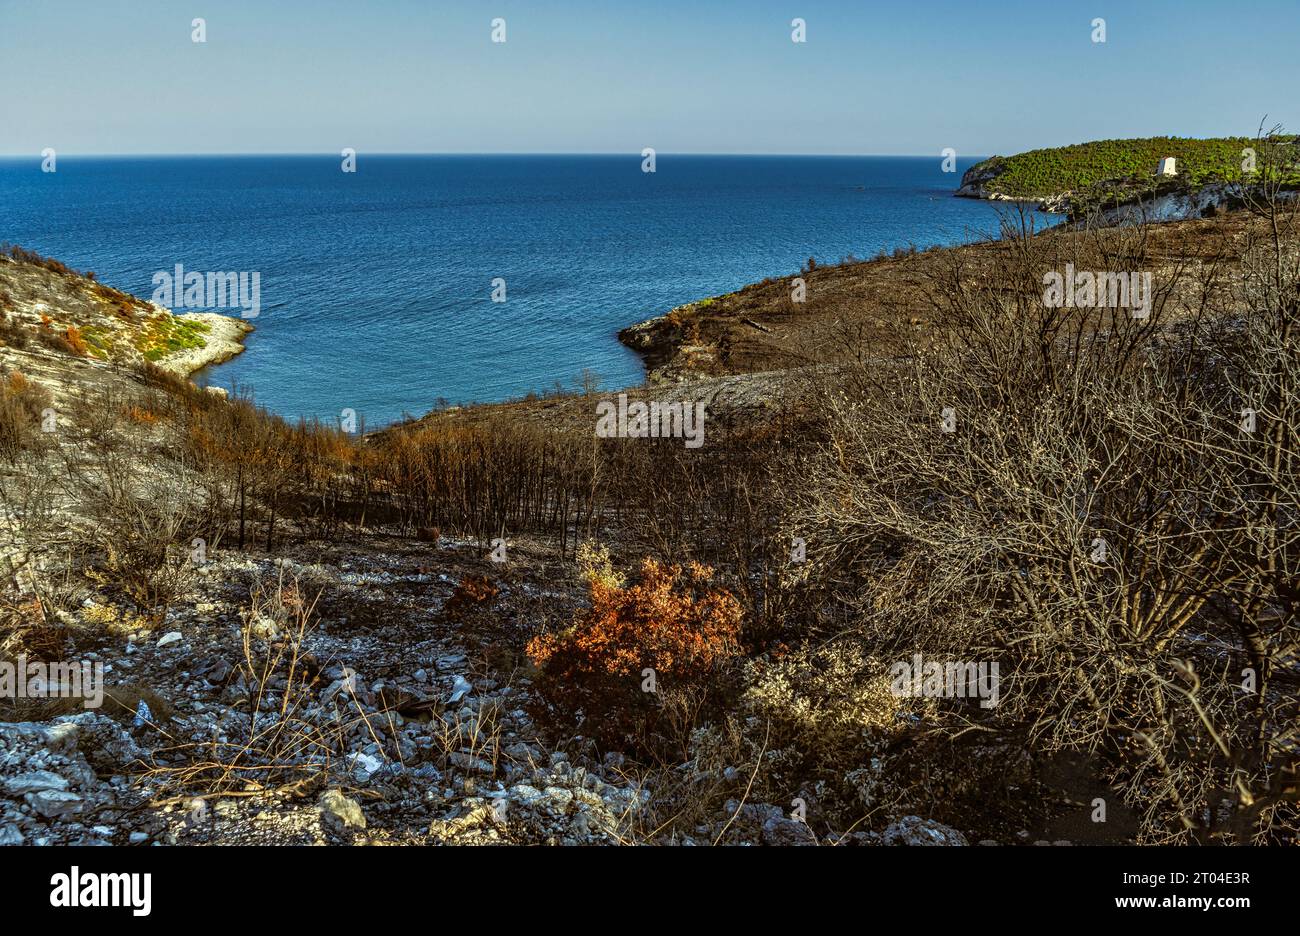 Summer fires have consumed and burned Mediterranean vegetation along the Gargano coast. Puglia, Italy, Europe Stock Photo